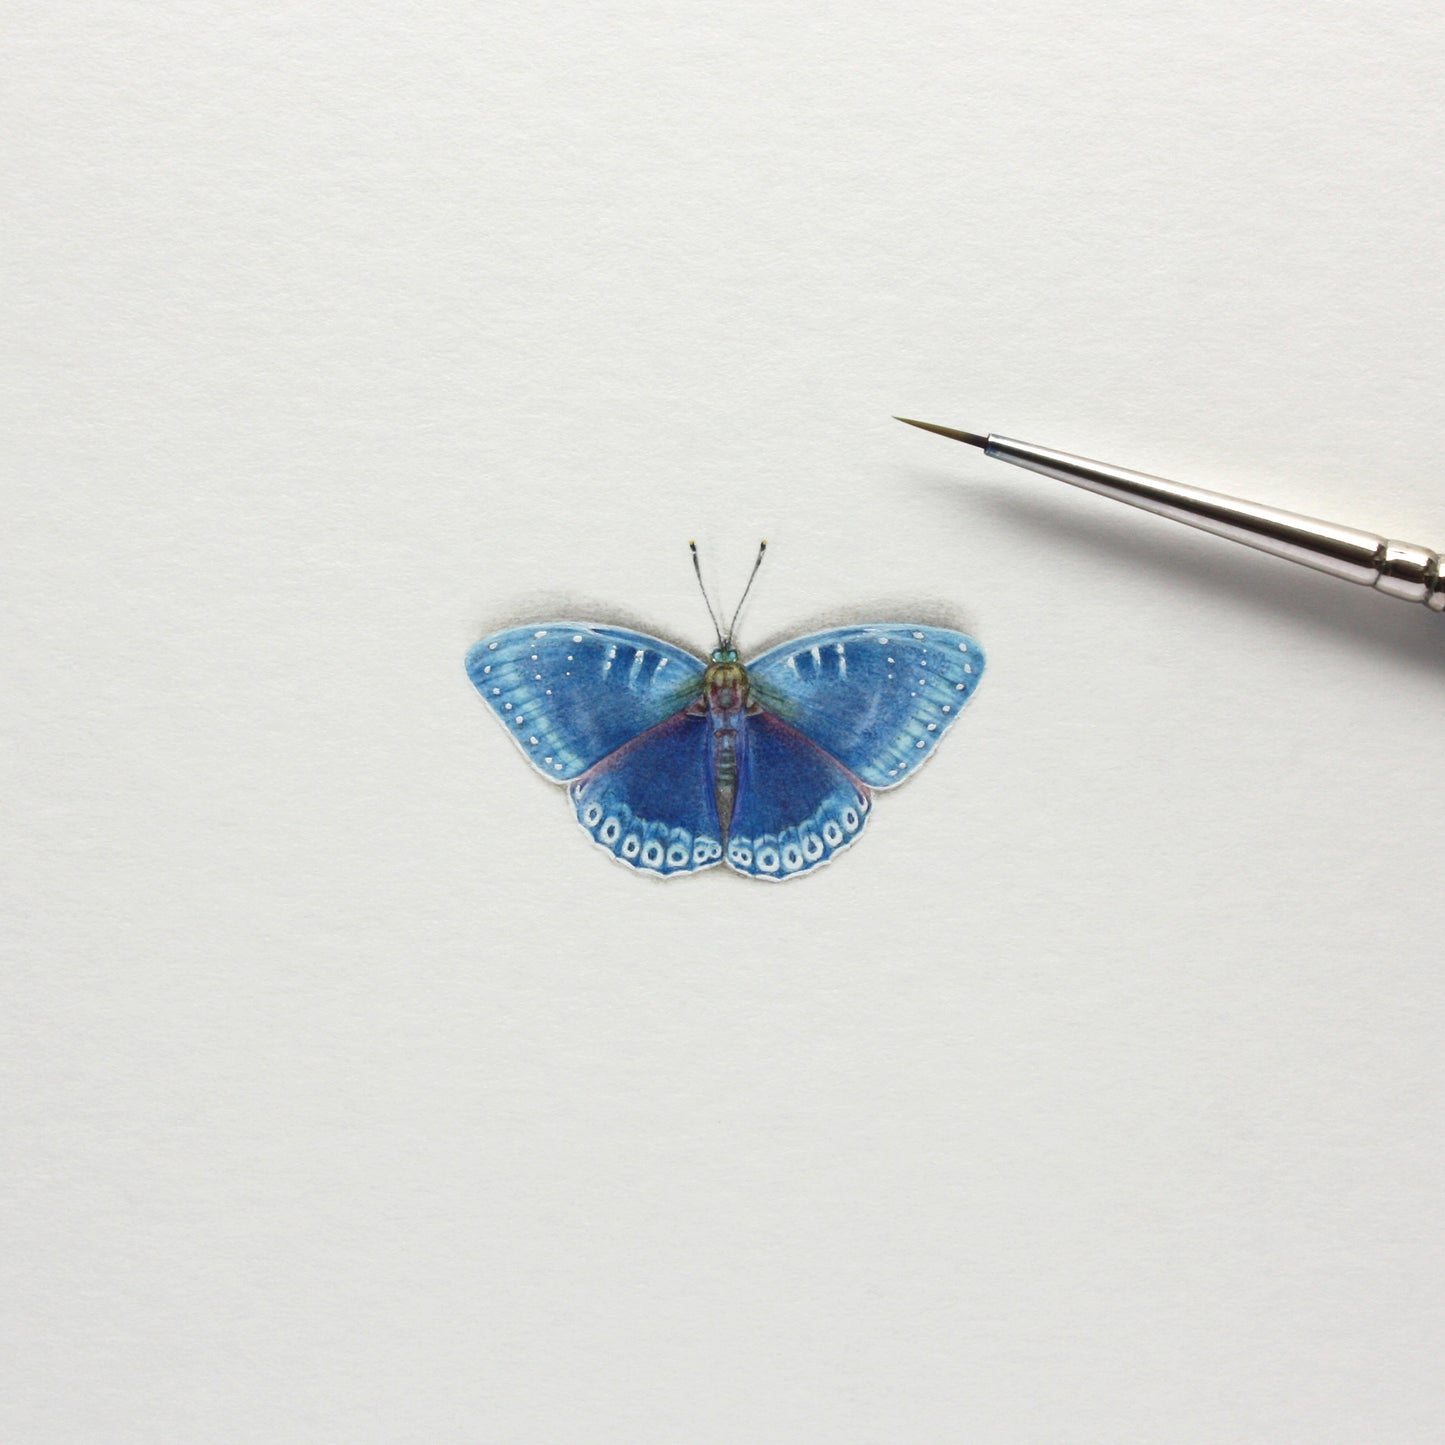 PRINT of watercolor miniature painting. Popinjay Butterfly